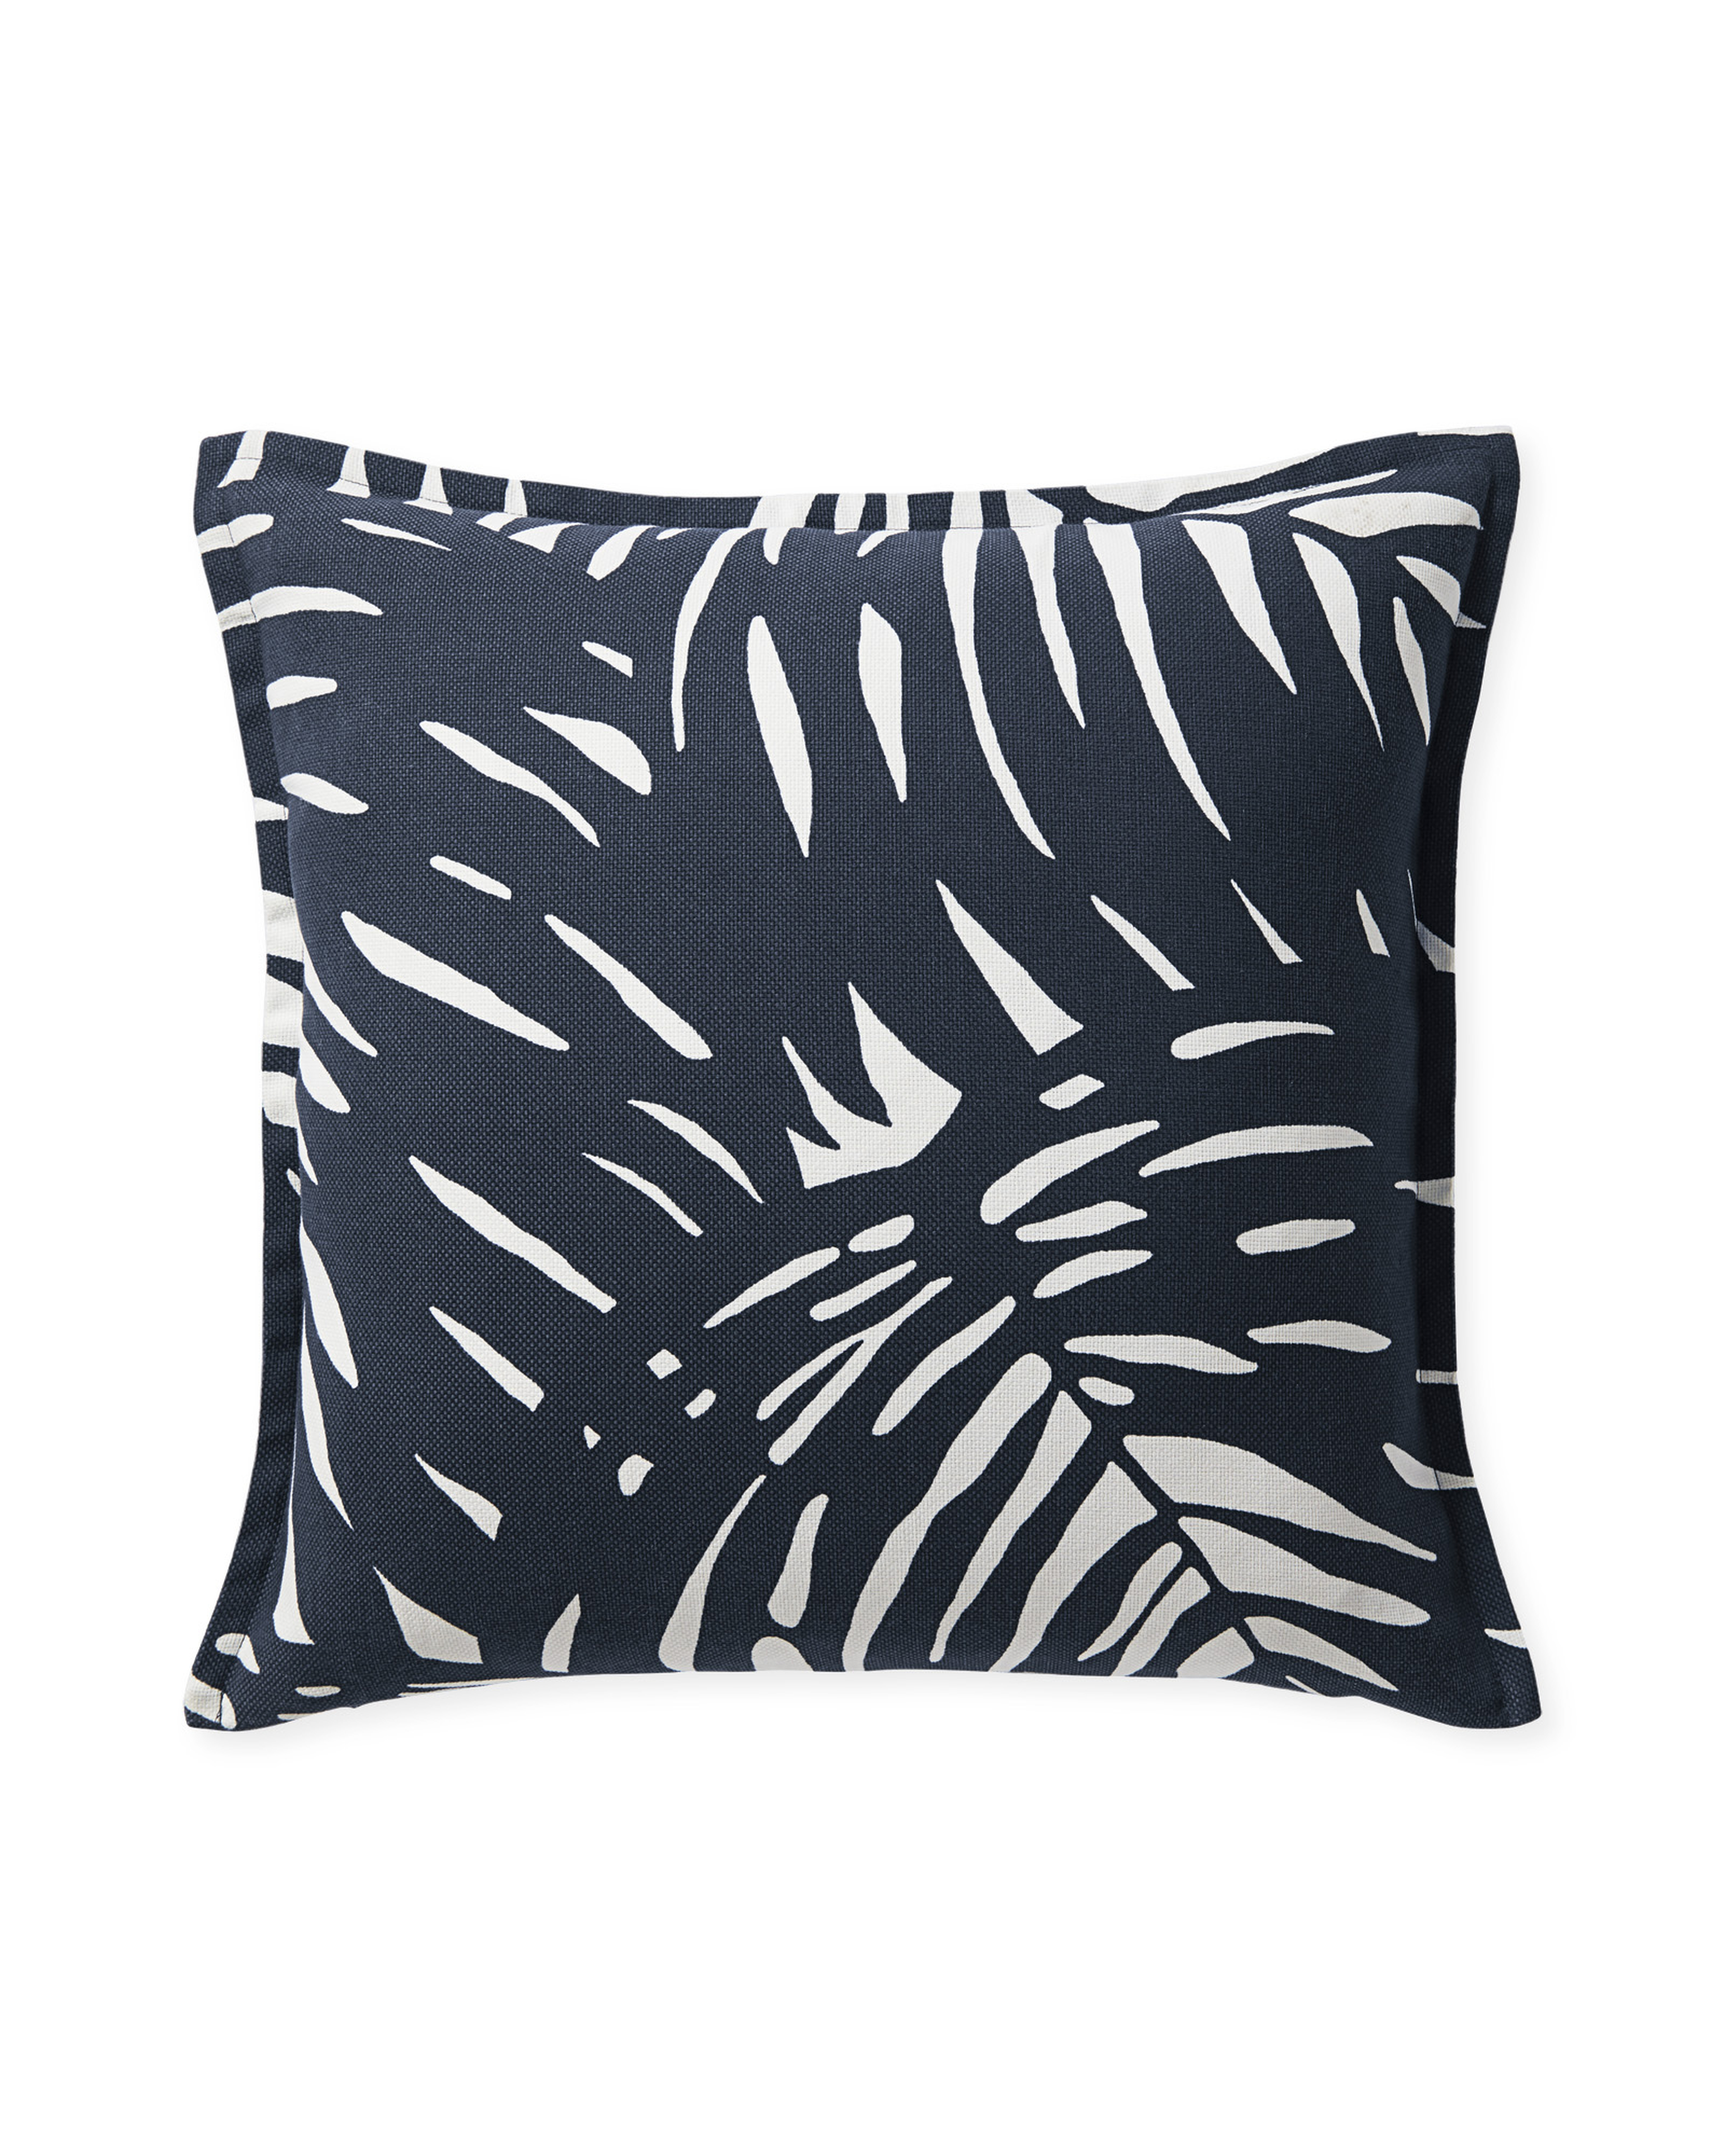 Palm Outdoor Pillow Cover - Midnight - Insert sold separately - Serena and Lily